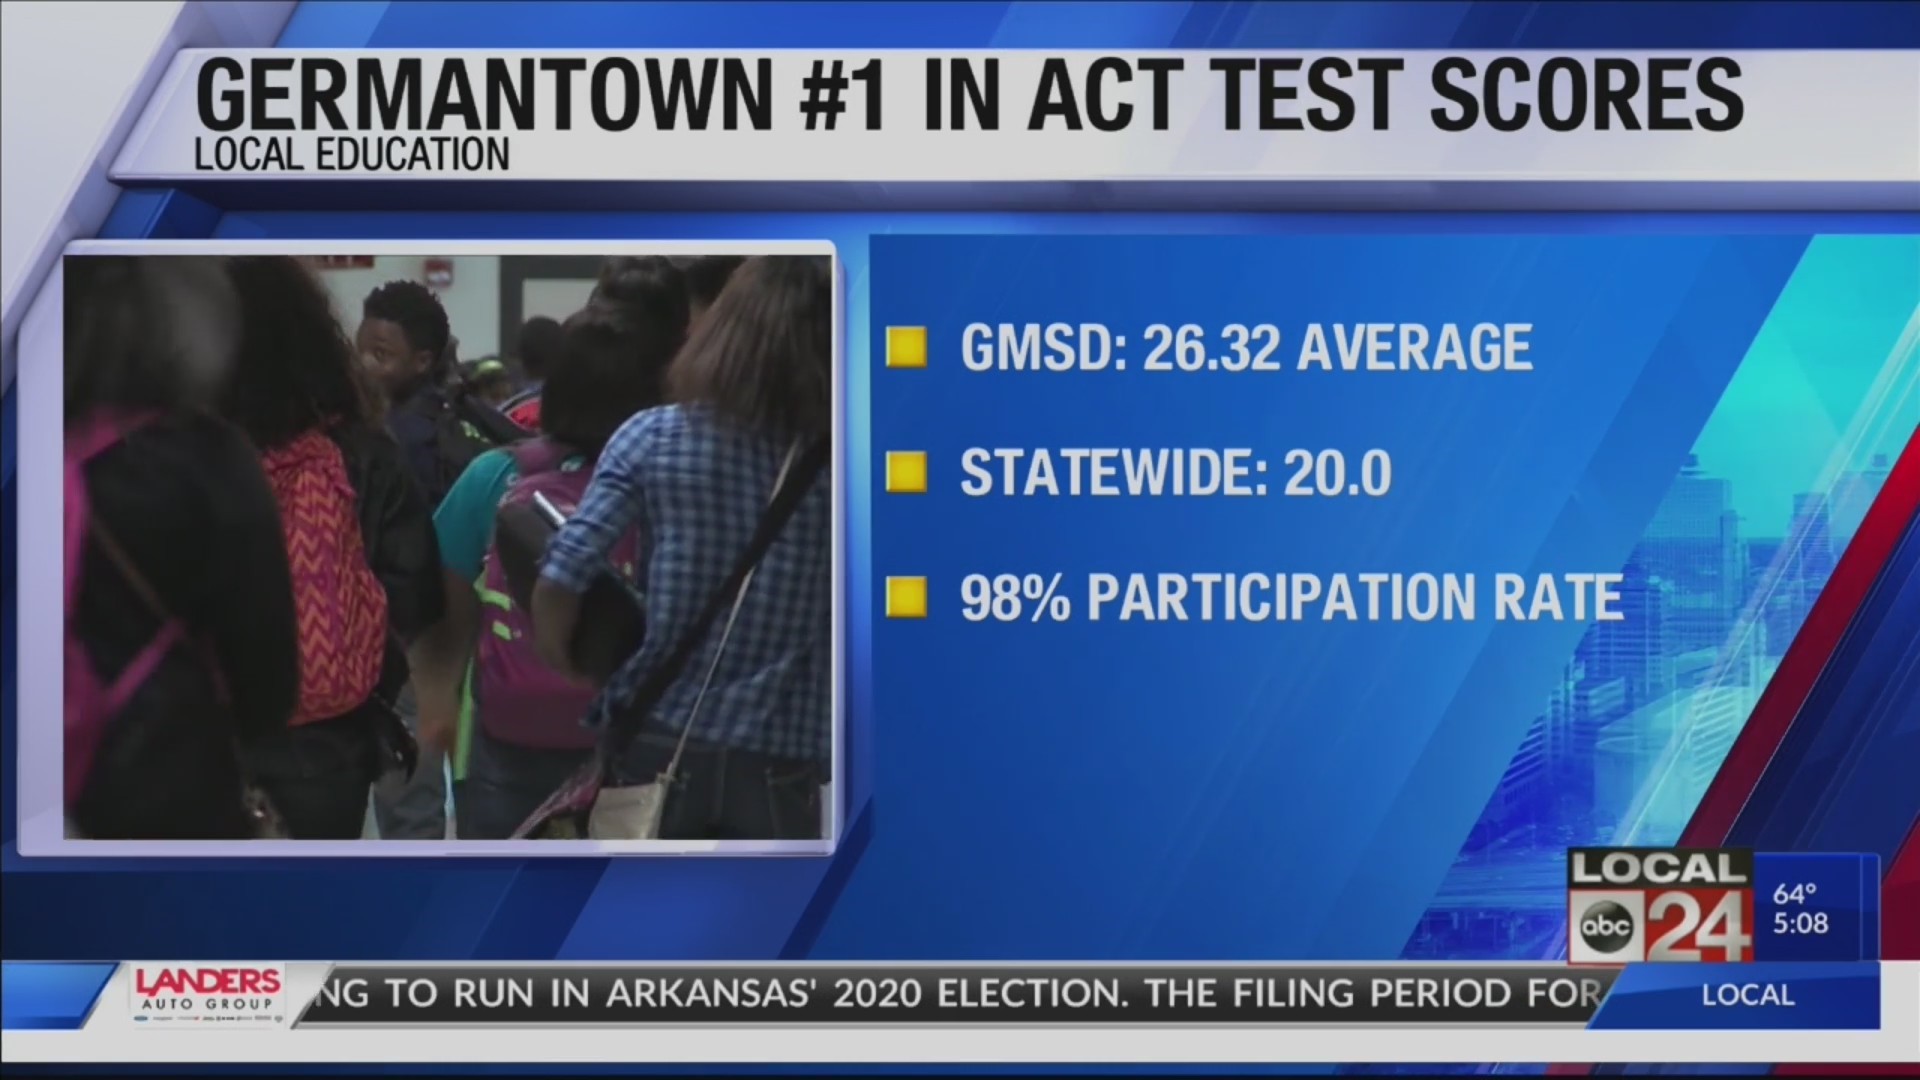 86.2% of Germantown Municipal School District students score a 21 or above on ACT